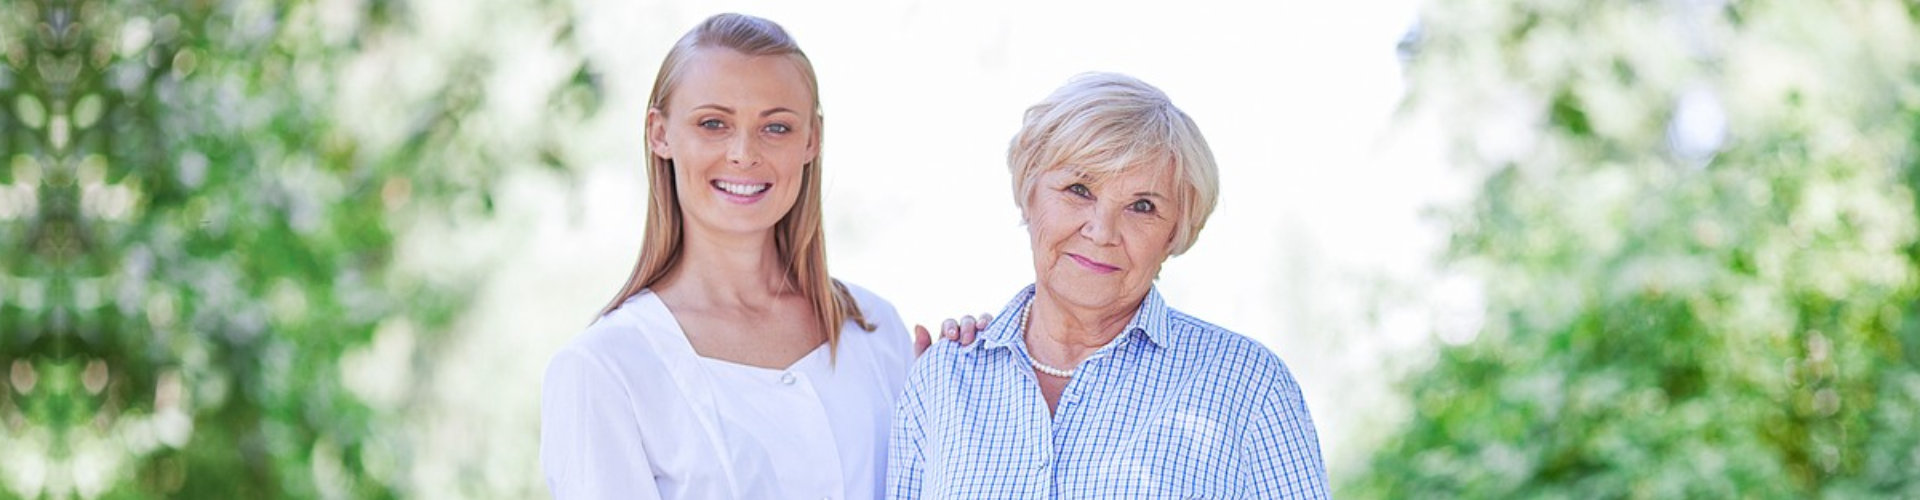 caregiver and senior woman smiling outdoor